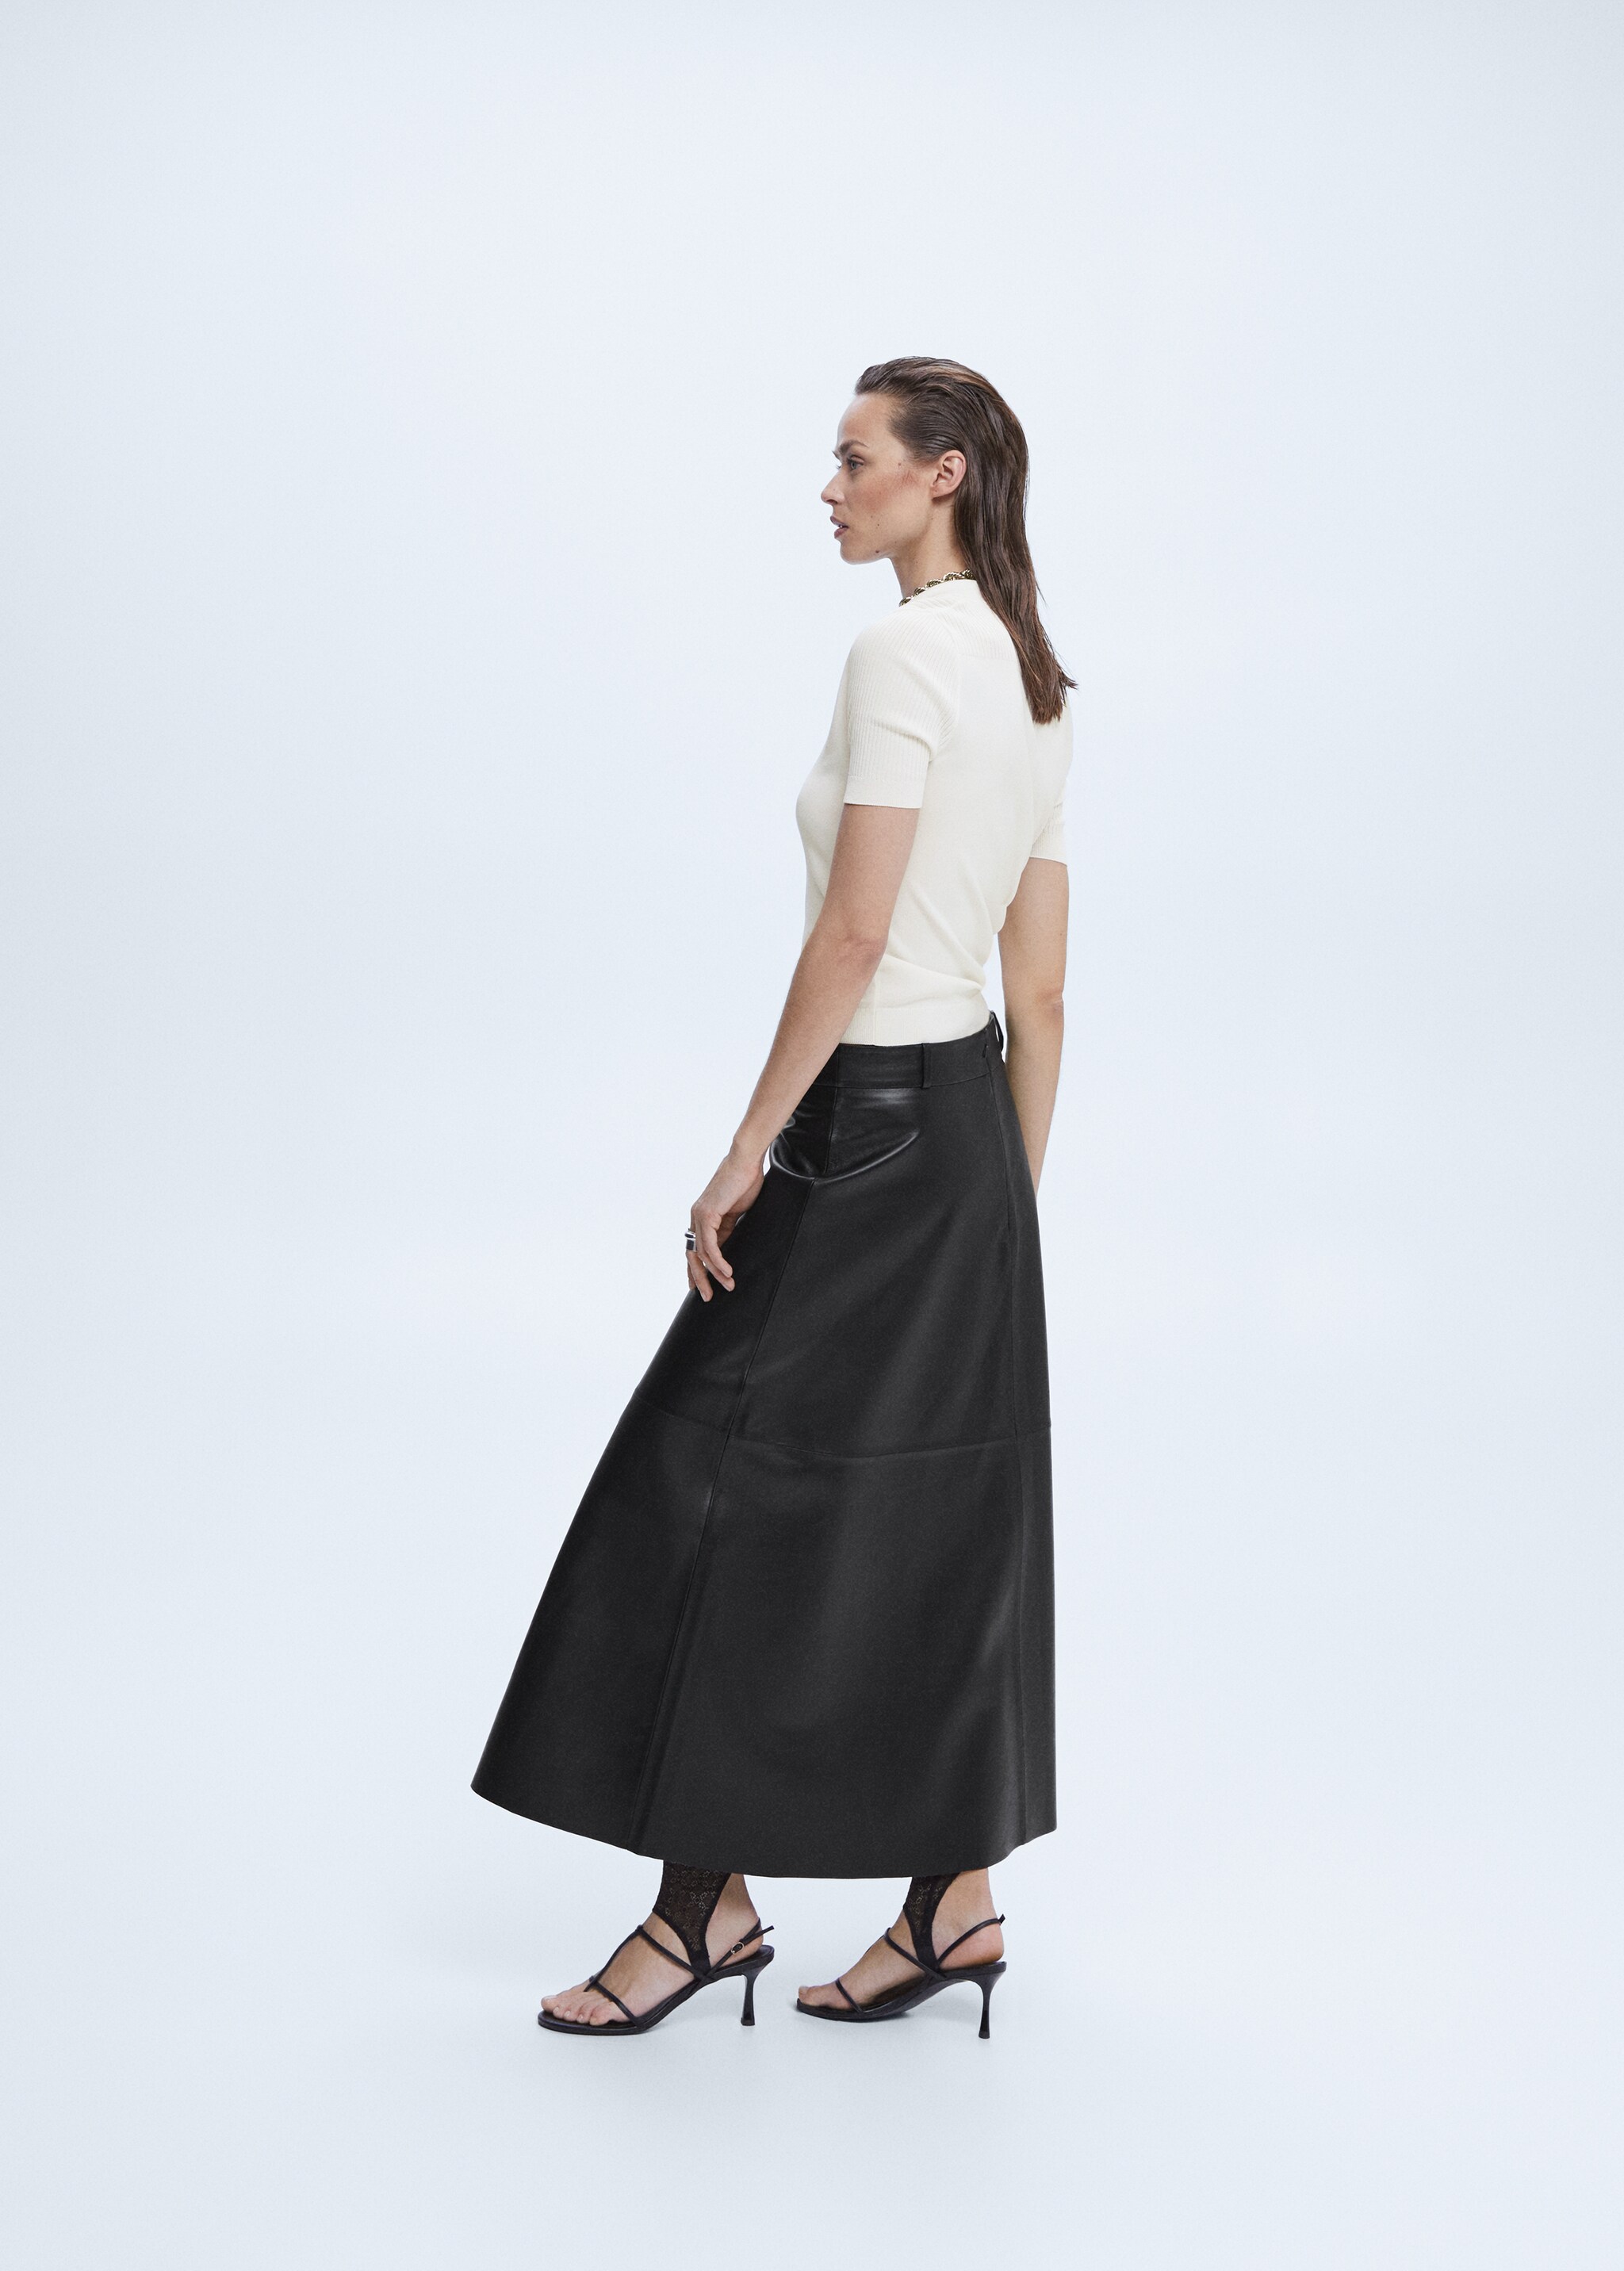 100% leather midi skirt - Details of the article 6